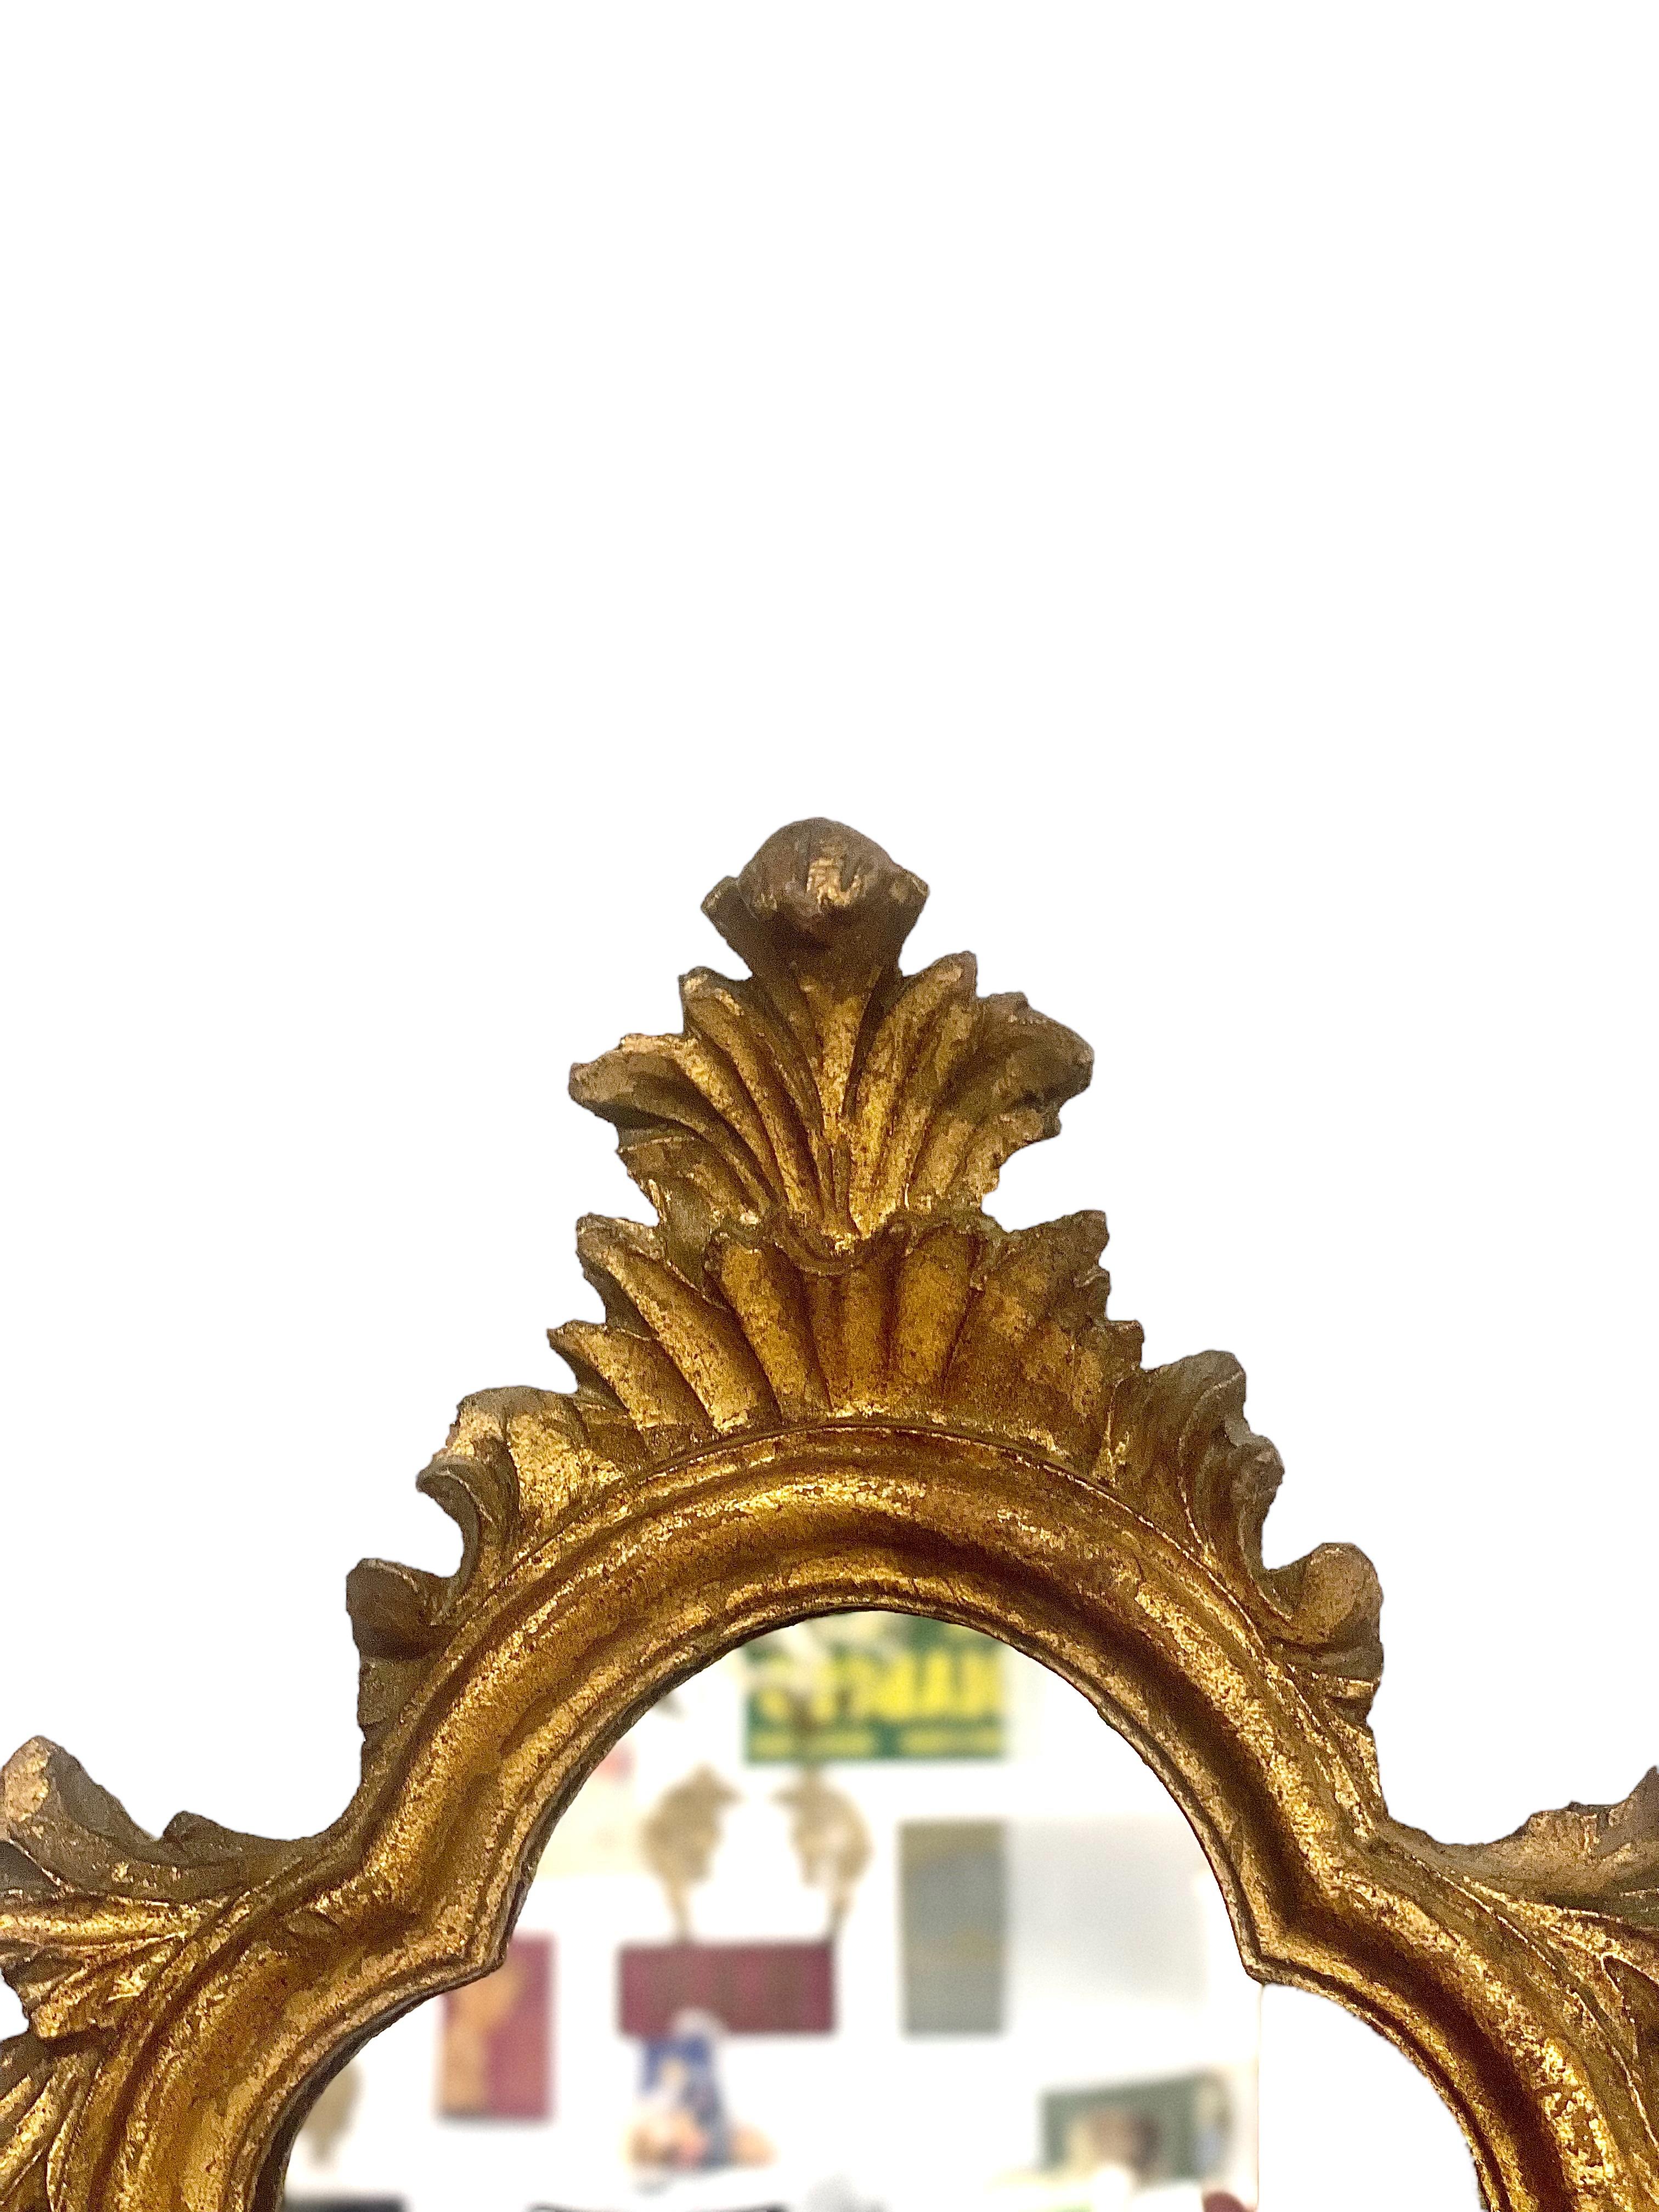 A petite ornate Louis XV baroque style wall mirror, crafted from wood and gilded stucco in a striking scalloped design. Dating from the 18th century, this petite and stylish mirror sits beautifully within an ornate hand-carved frame, and is topped